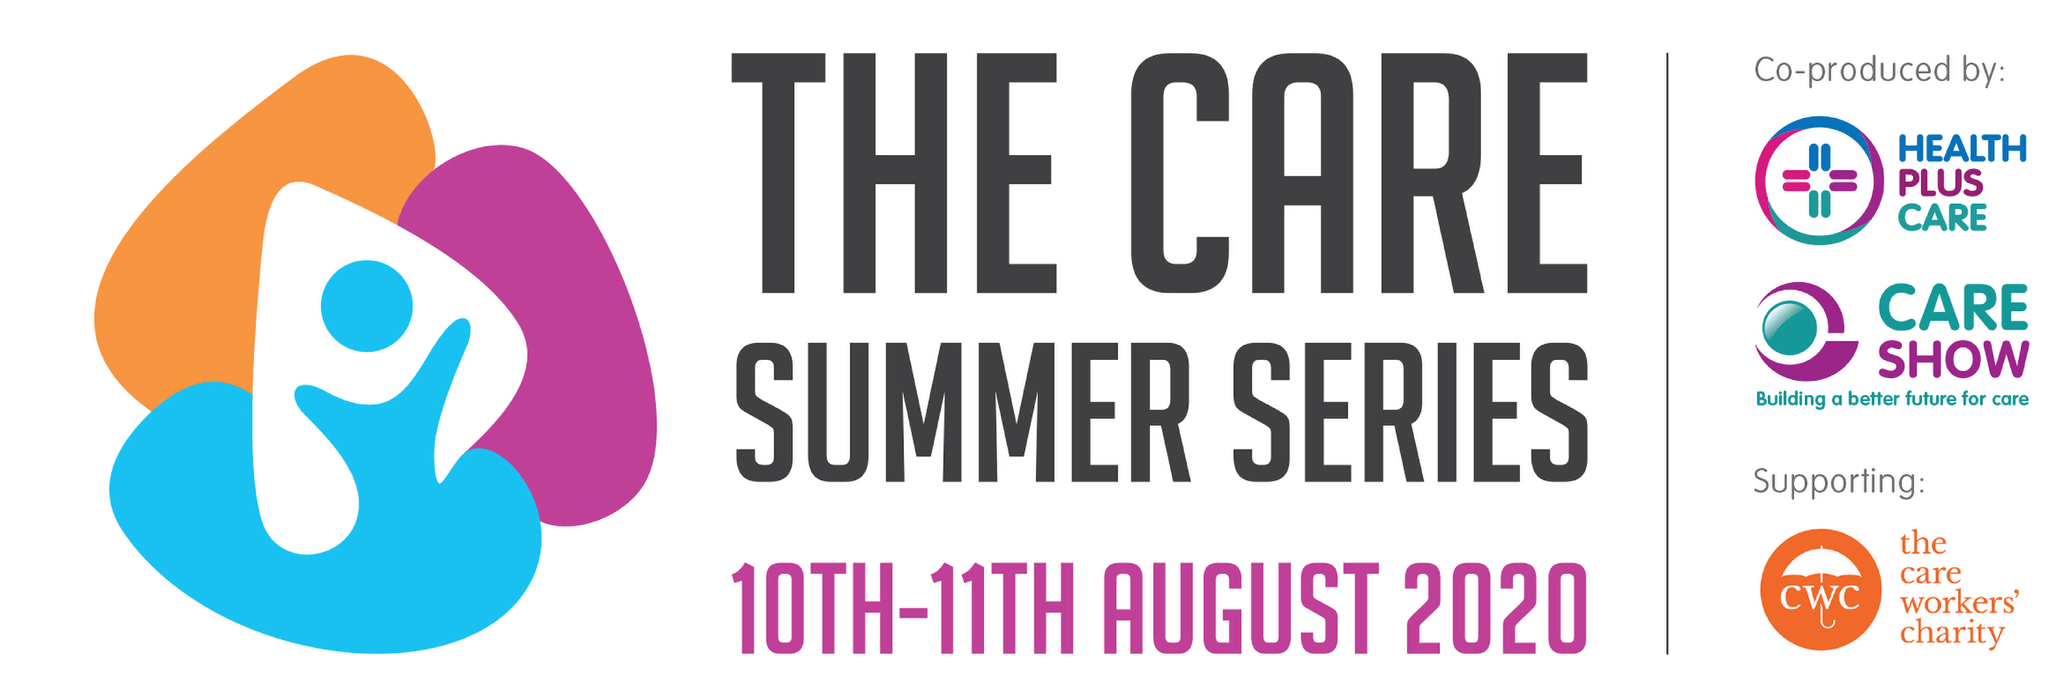 The Care Summer Series Announced - a Free Virtual Event for the Care Sector this August